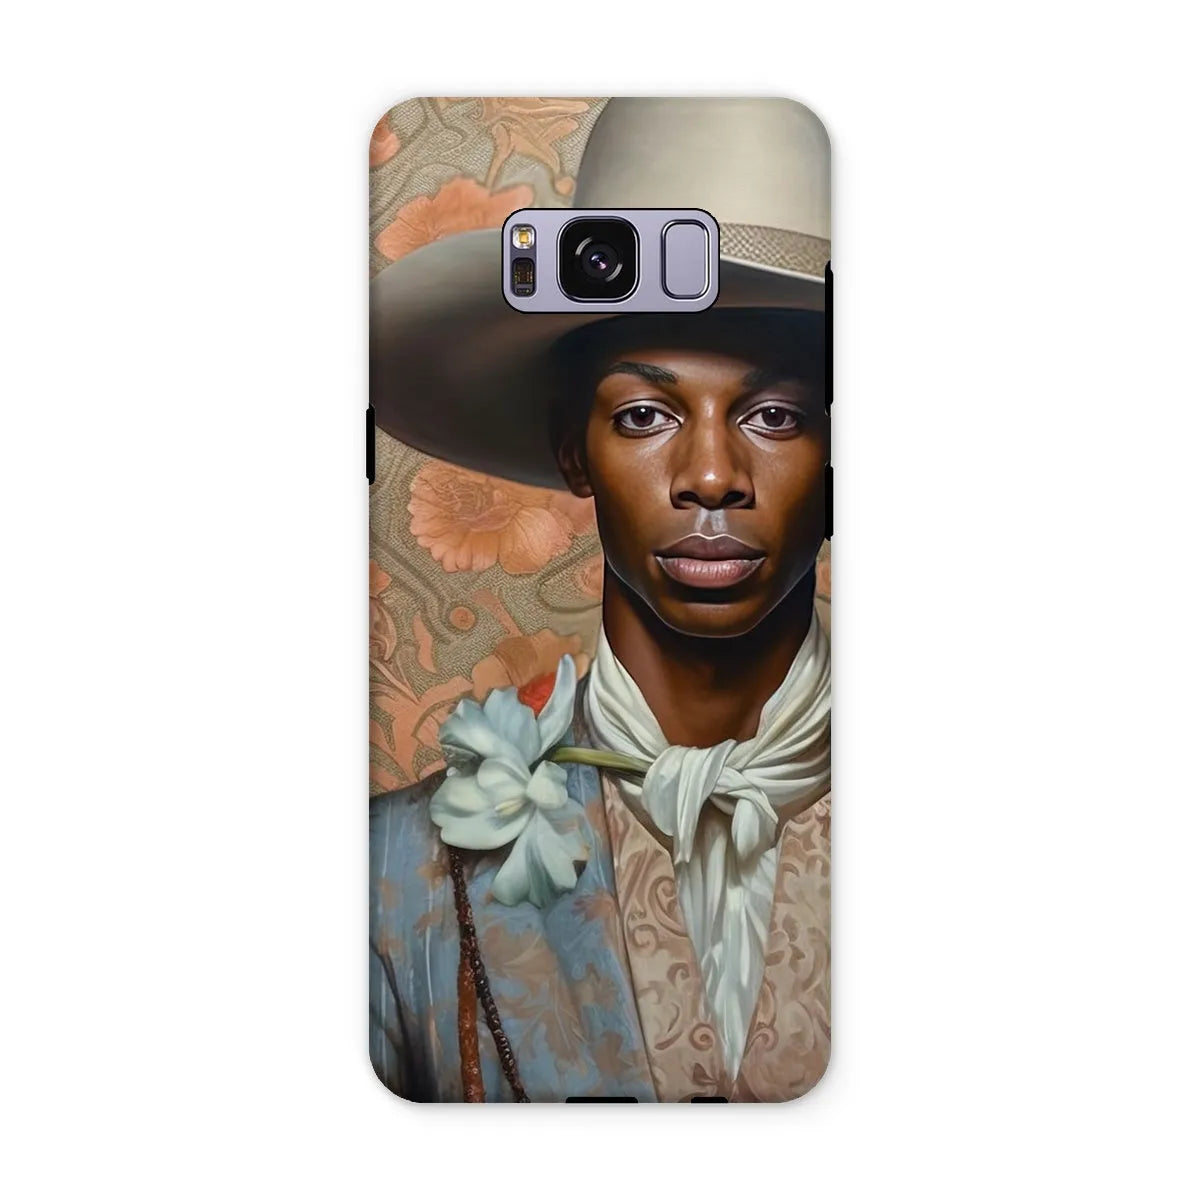 Apollo The Gay Cowboy - Gay Aesthetic Art Phone Case - Samsung Galaxy S8 Plus / Matte - Mobile Phone Cases - Aesthetic